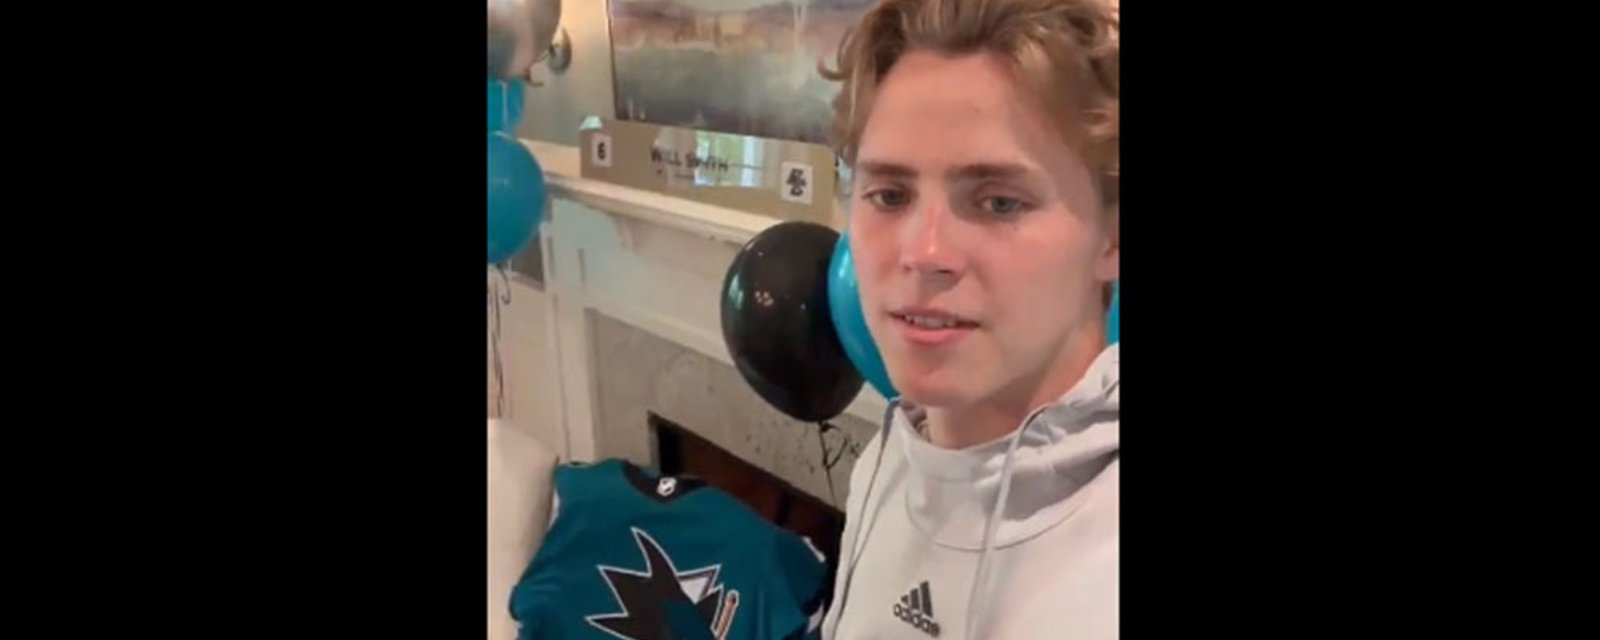 Top prospect Will Smith officially joins the Sharks